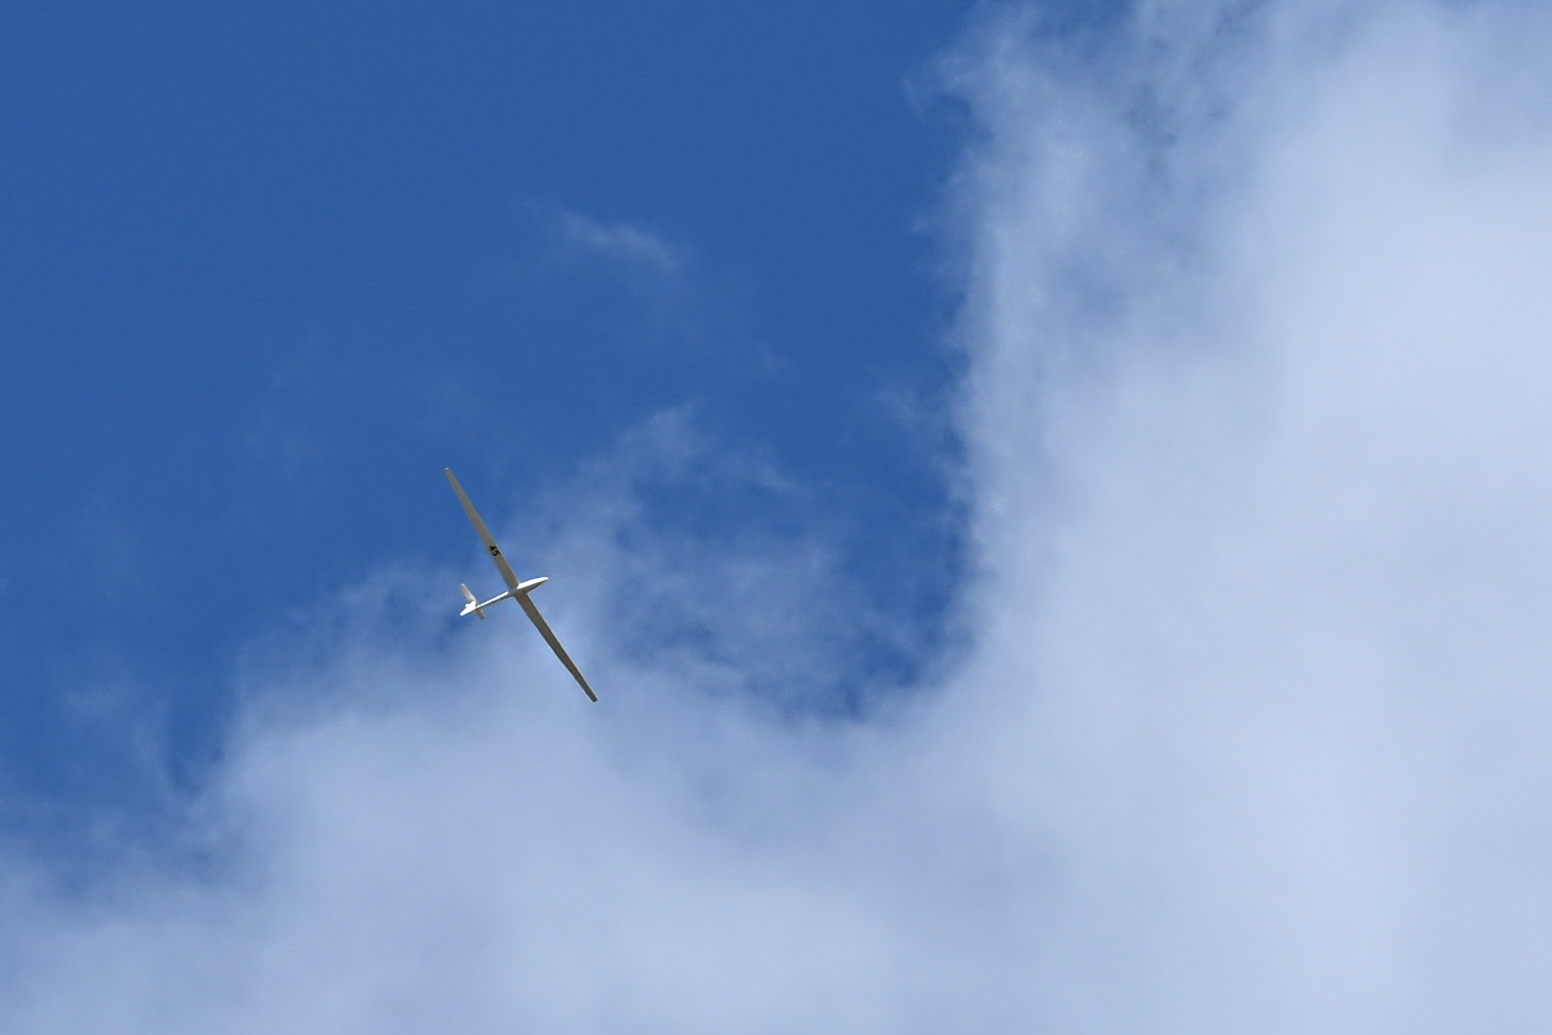 I spotted some kind of glider aircraft doing circles high above us. It seemed silent at first, but when it passed closer overhead, I am pretty sure I heard some kind of motor noise. At first I thought it might be a drone, but after researching some similar looking aircraft, it could have been a 2 seater glider plane. I'm not sure.